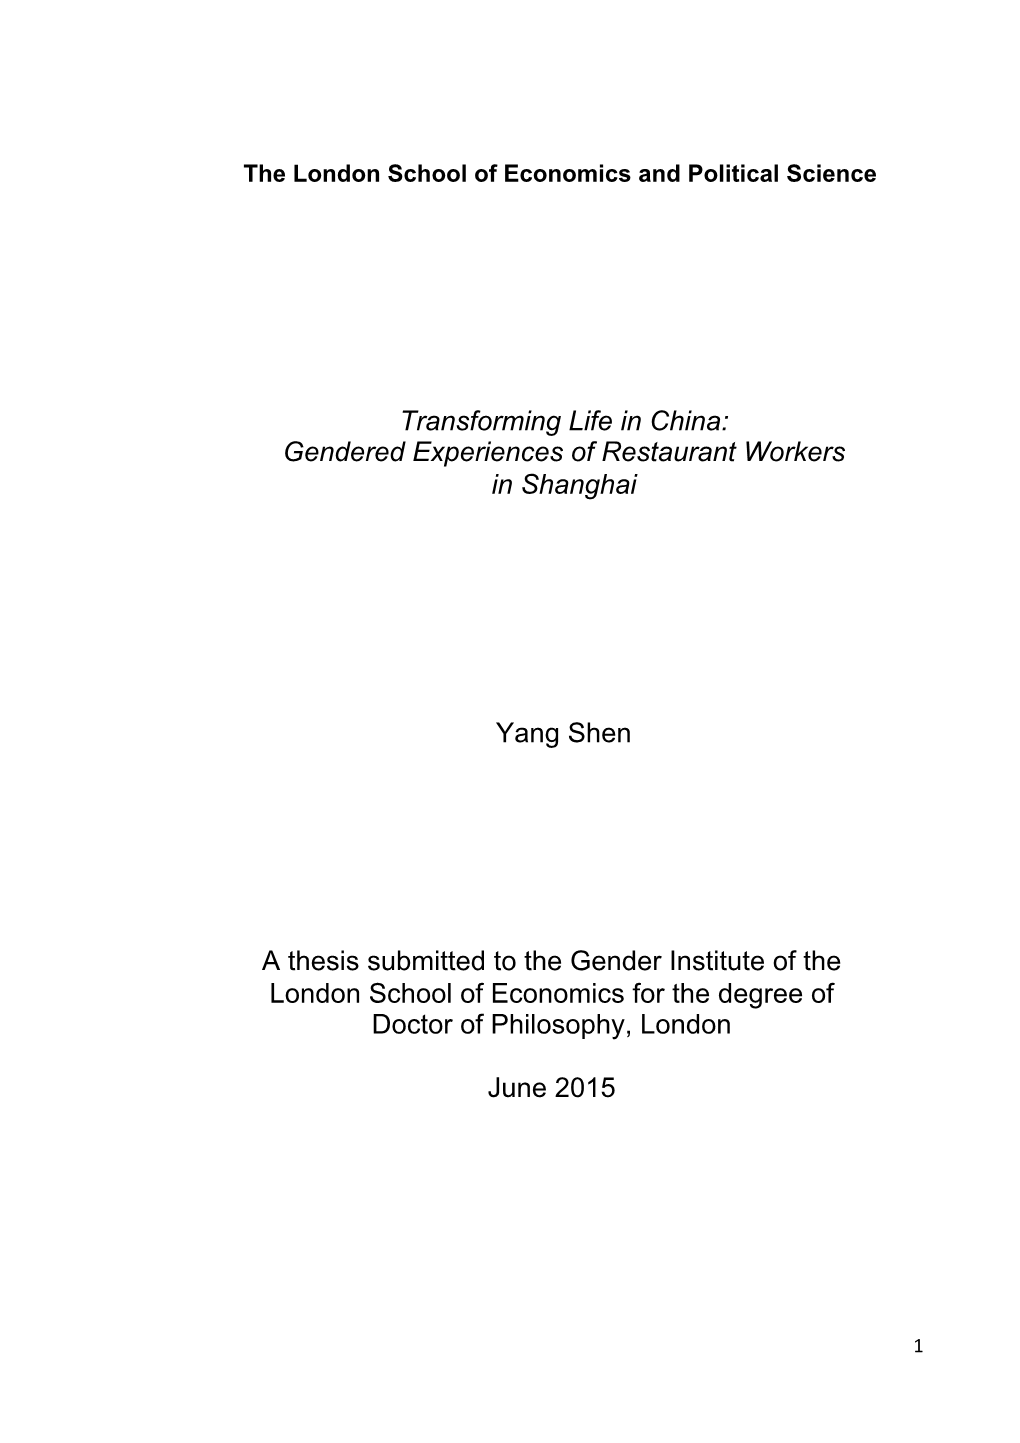 Transforming Life in China: Gendered Experiences of Restaurant Workers in Shanghai